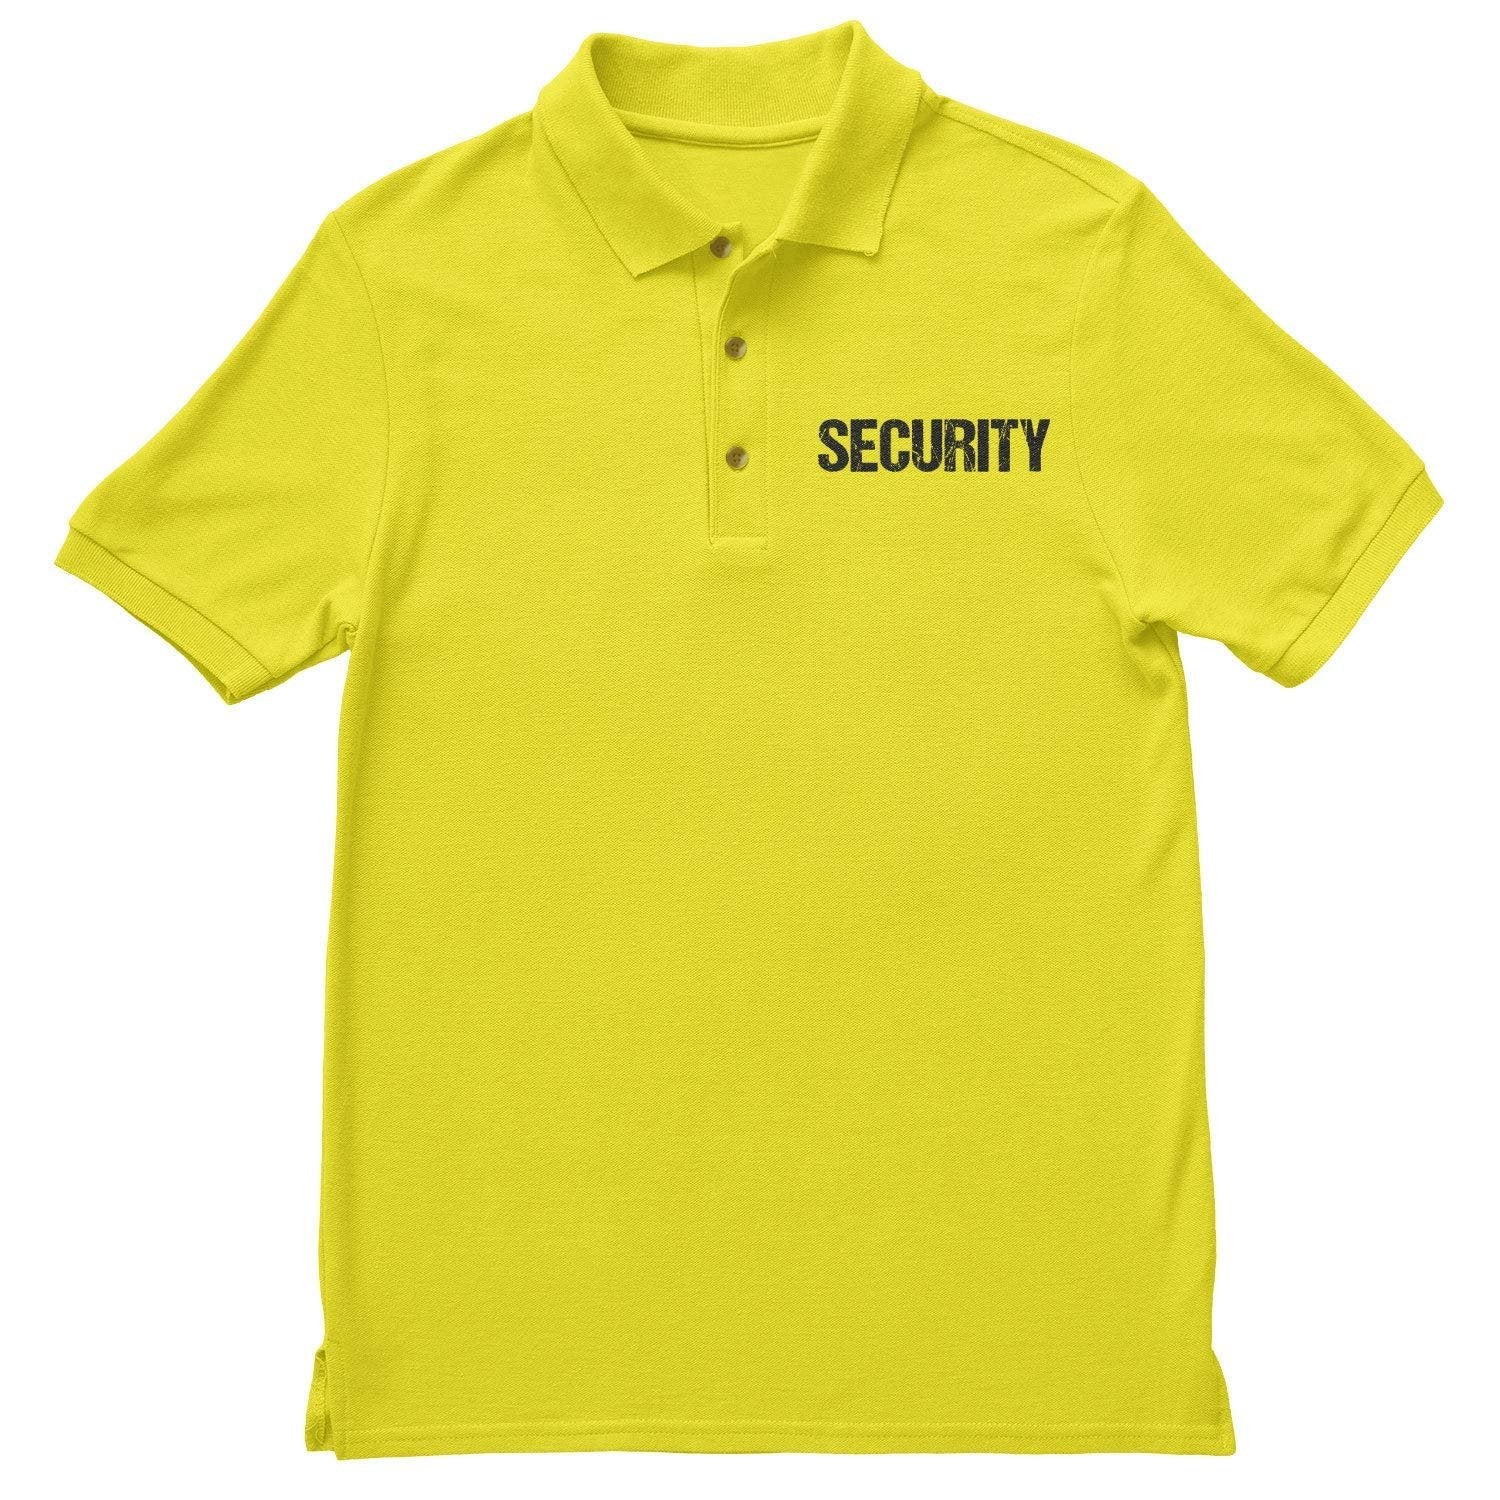 Security Polo Shirt Front & Back Print (Distressed, Safety Green & Black)